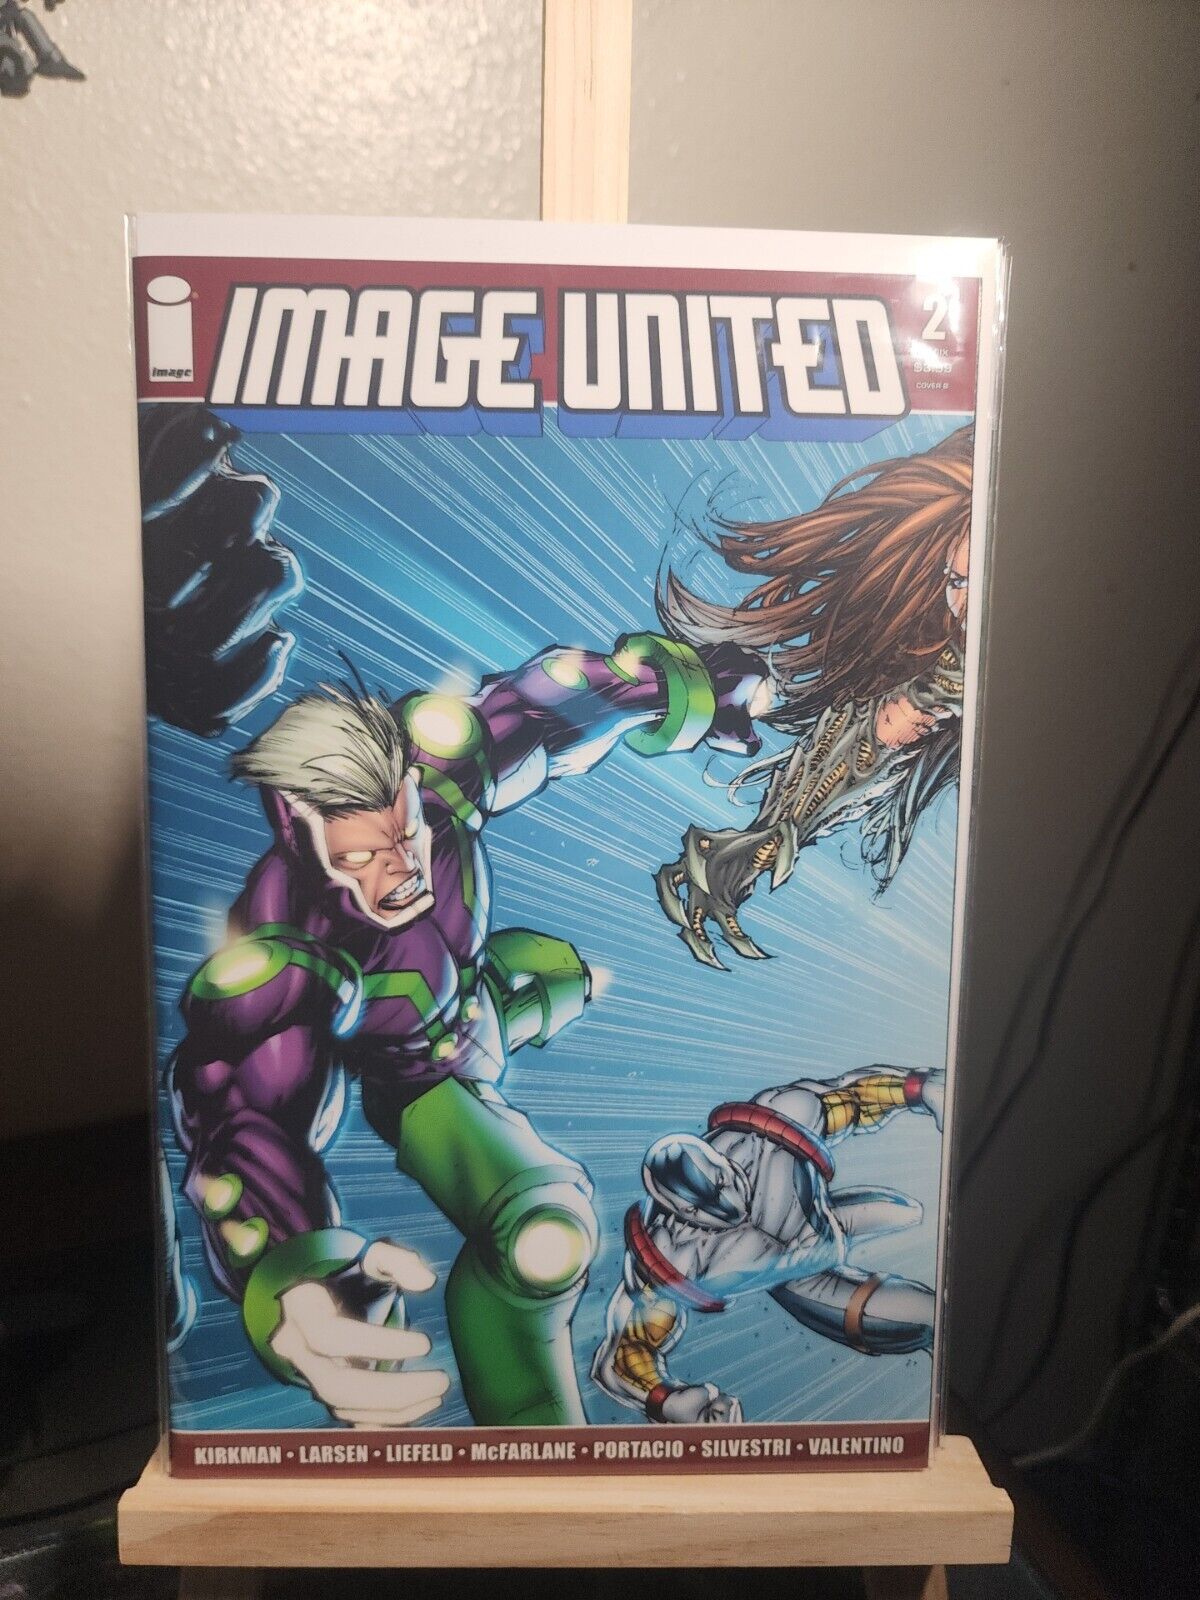 Image United 2 Covers B, C And F.